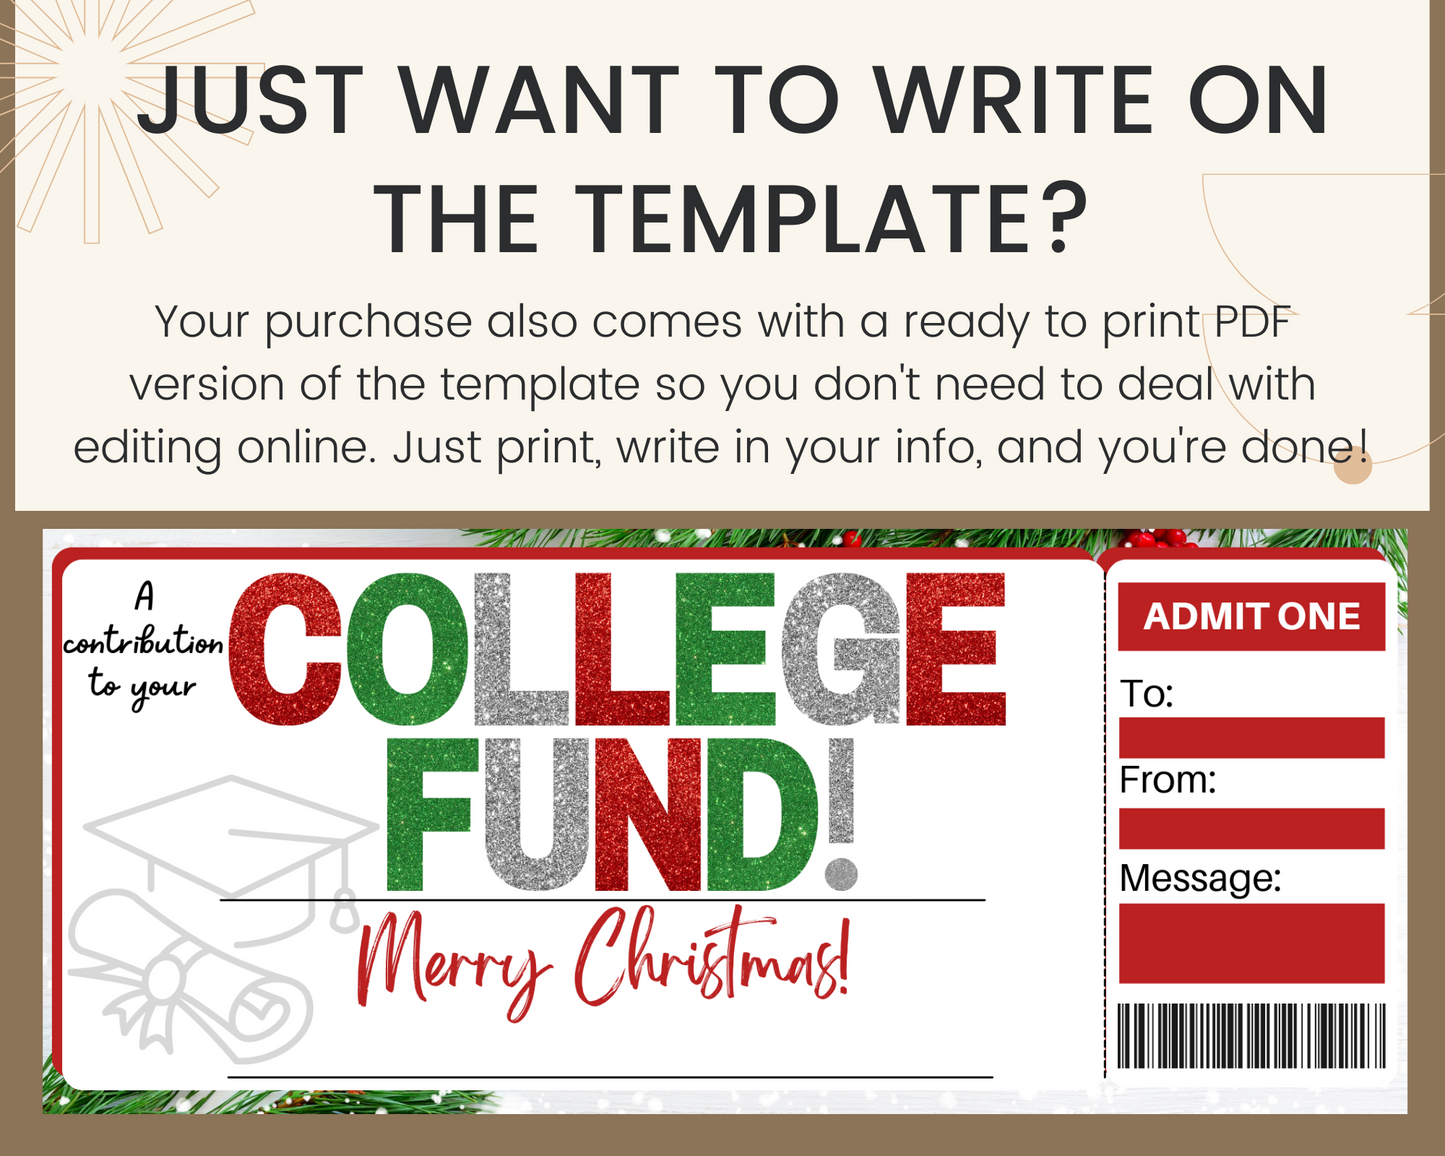 Christmas College Fund Gift Ticket Template